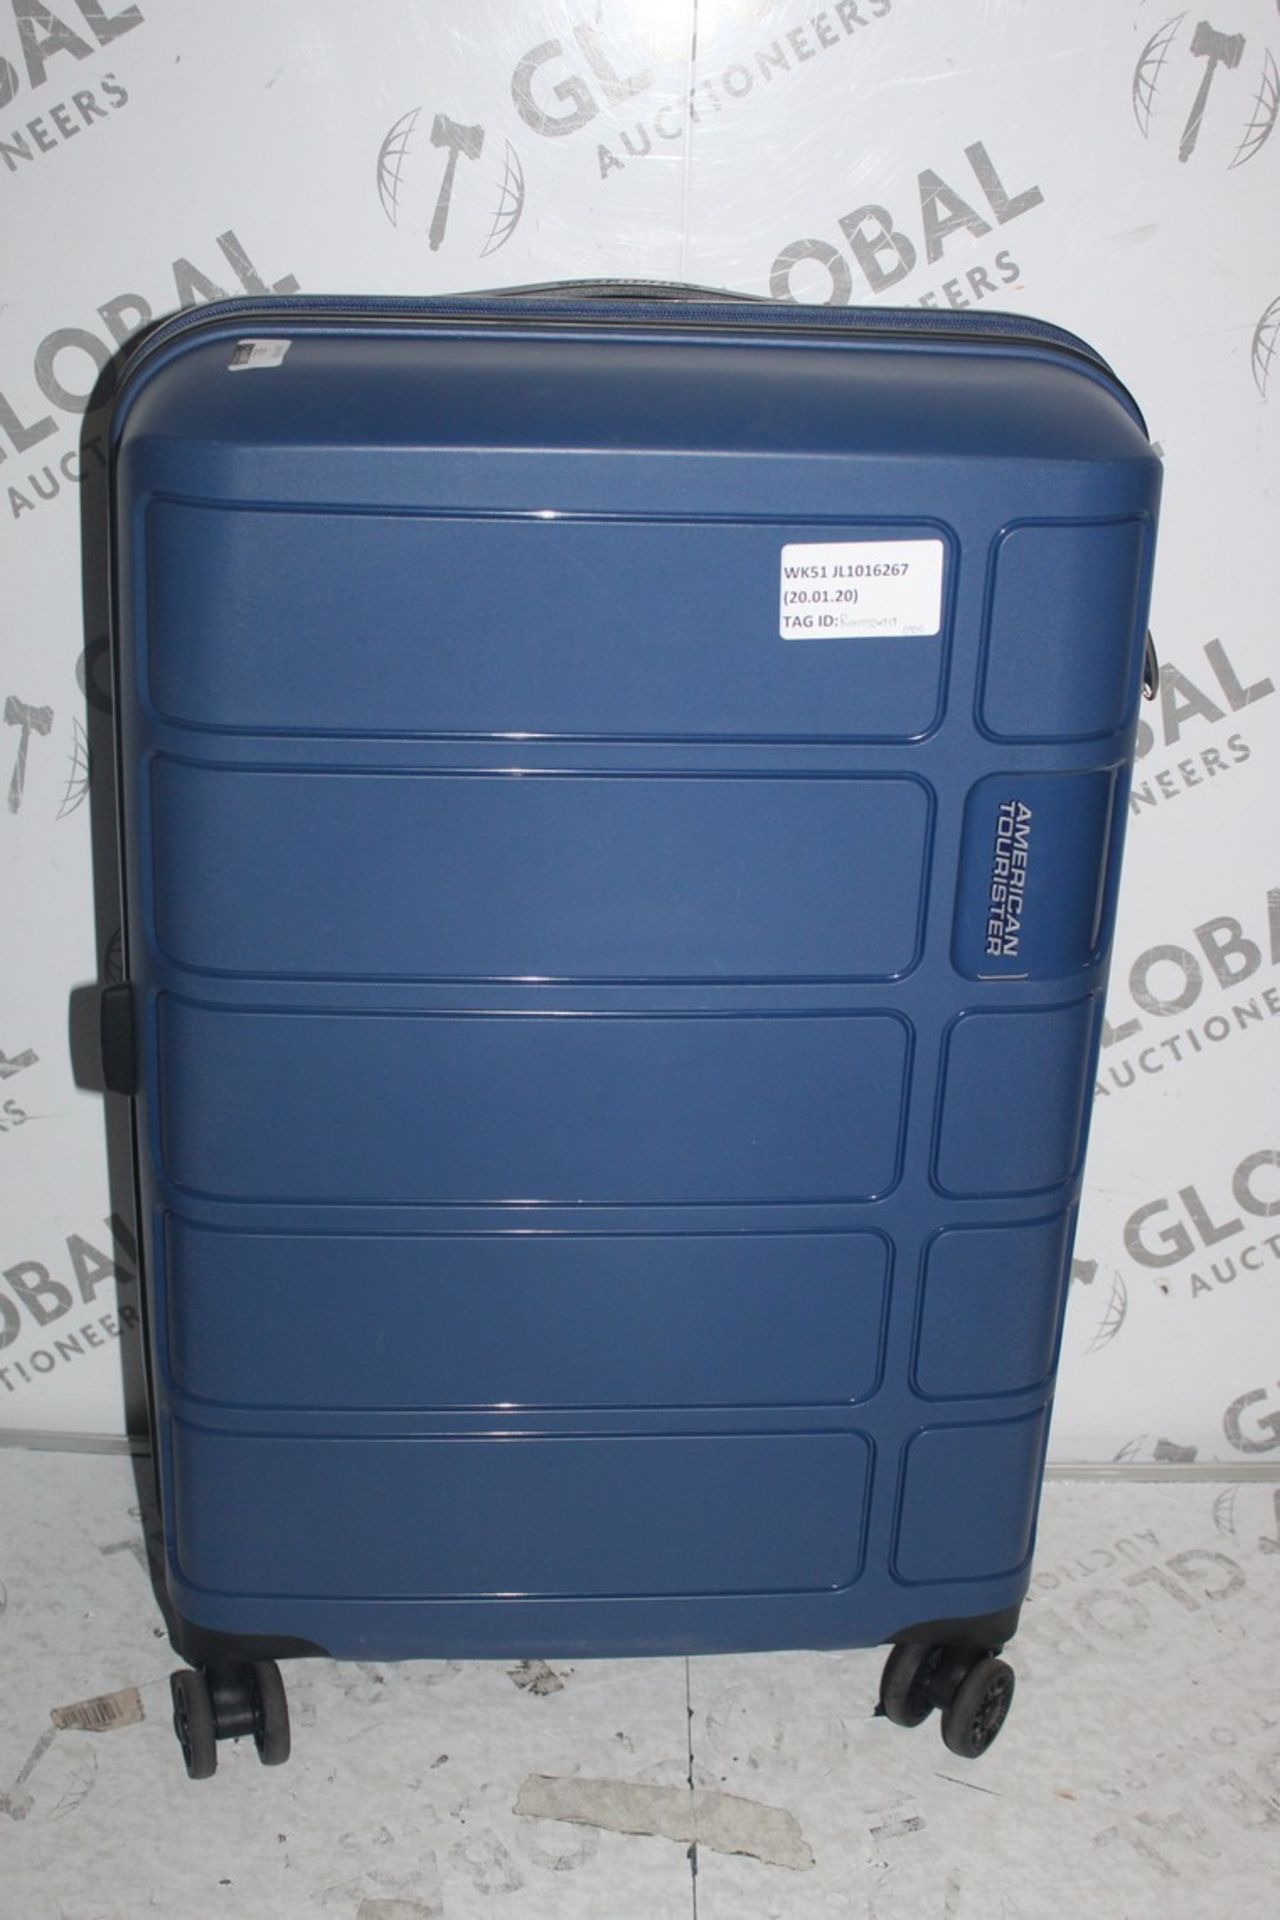 American Tourister Hard Shell 360 Wheel Suitcase RRP £95 (RET00324717) (Public Viewing and